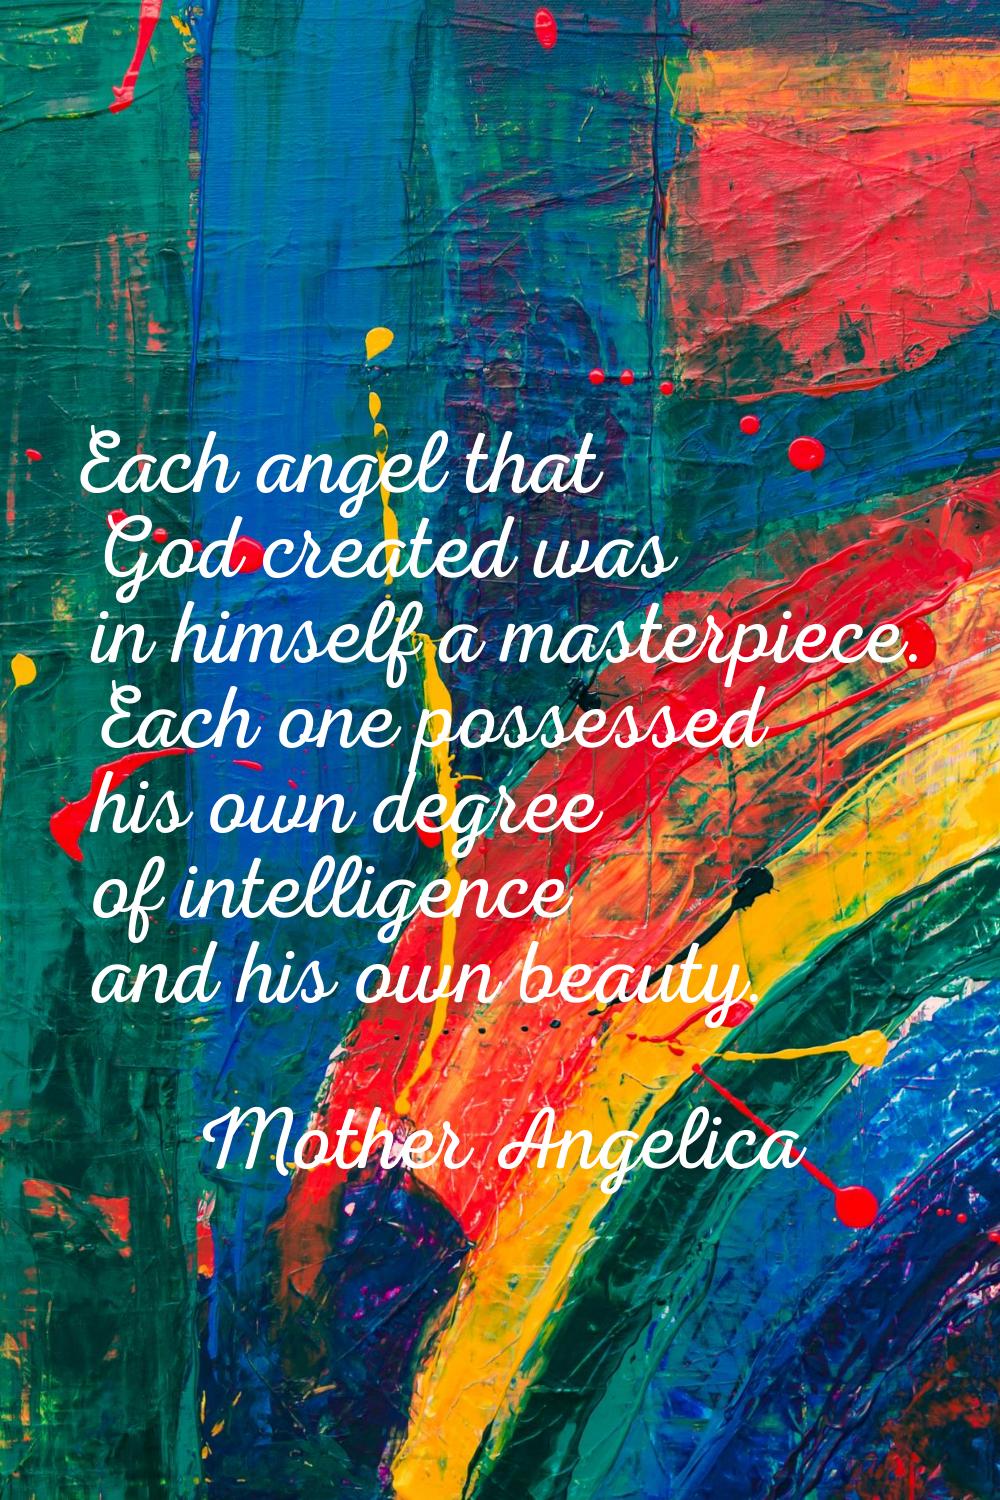 Each angel that God created was in himself a masterpiece. Each one possessed his own degree of inte